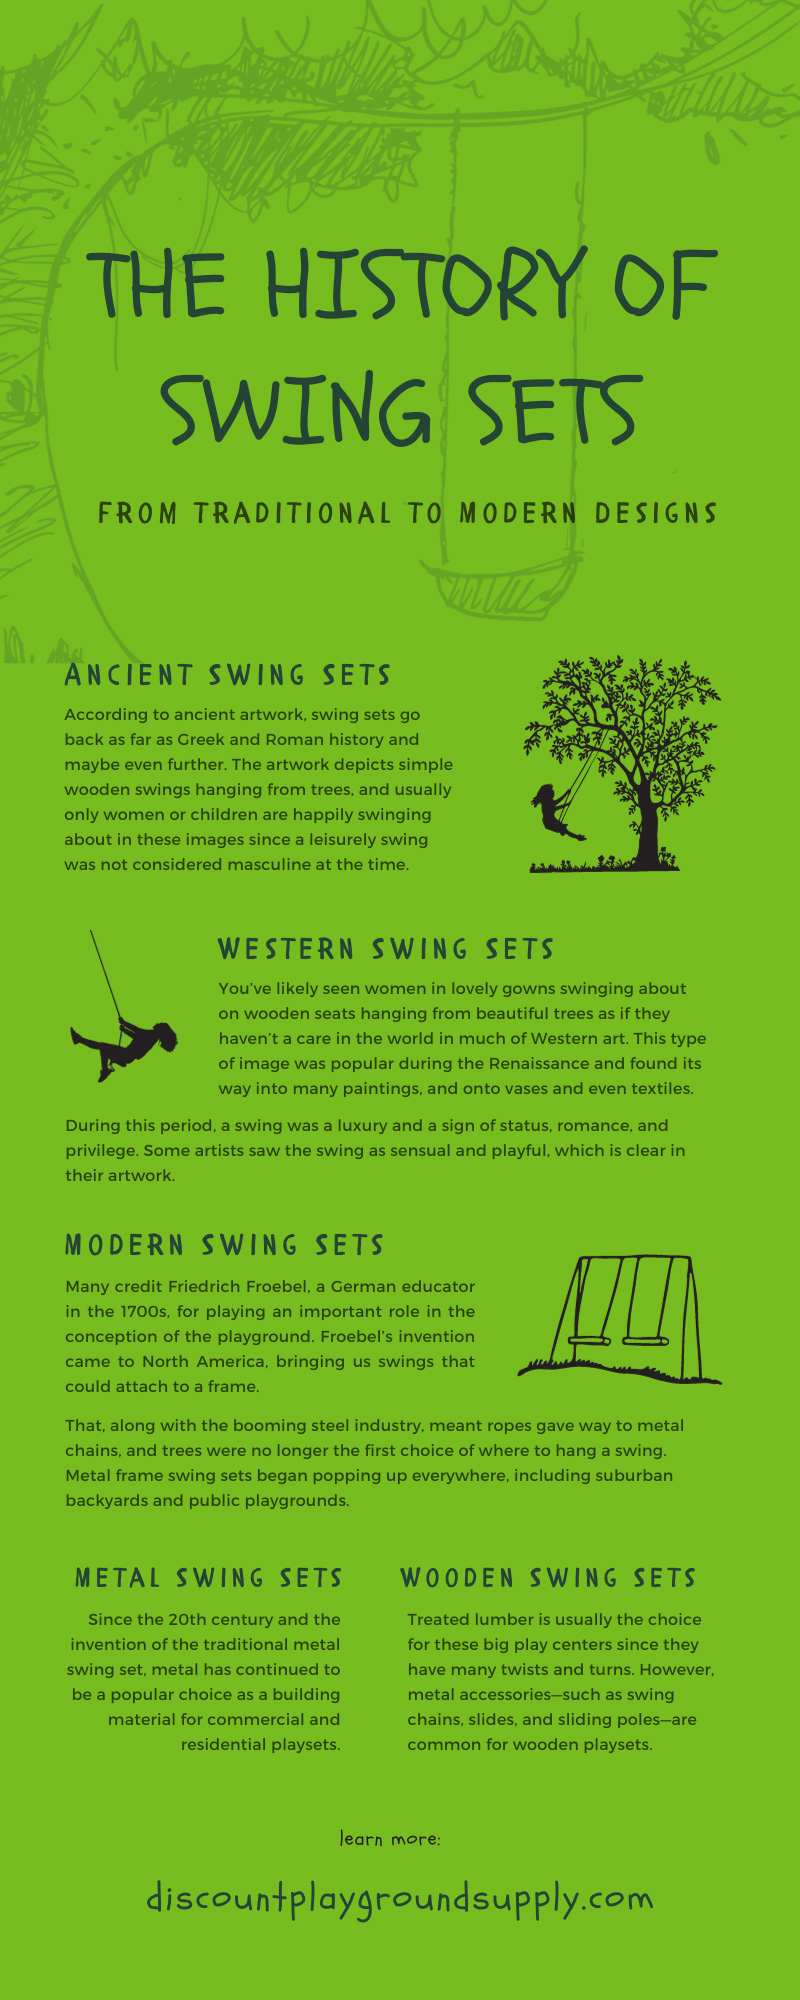 The History of Swing Sets from Traditional to Modern Designs